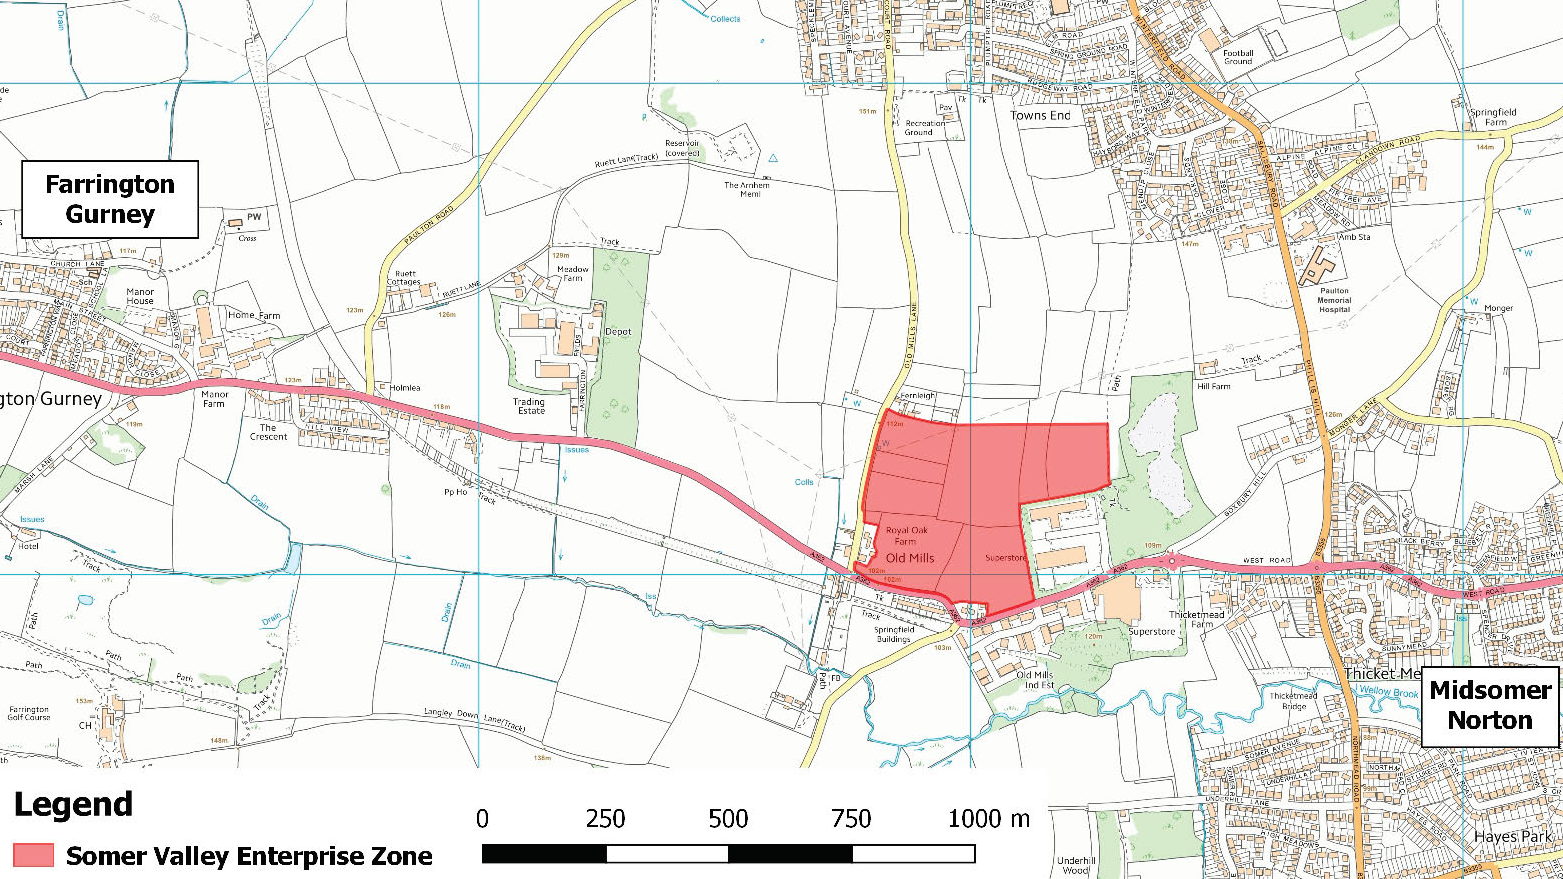 Image of site allocated for Somer Valley Enterprise Zone, adjoining the A362, Wickes and the spoil heap, on the north-eastern edge of Midsomer Norton